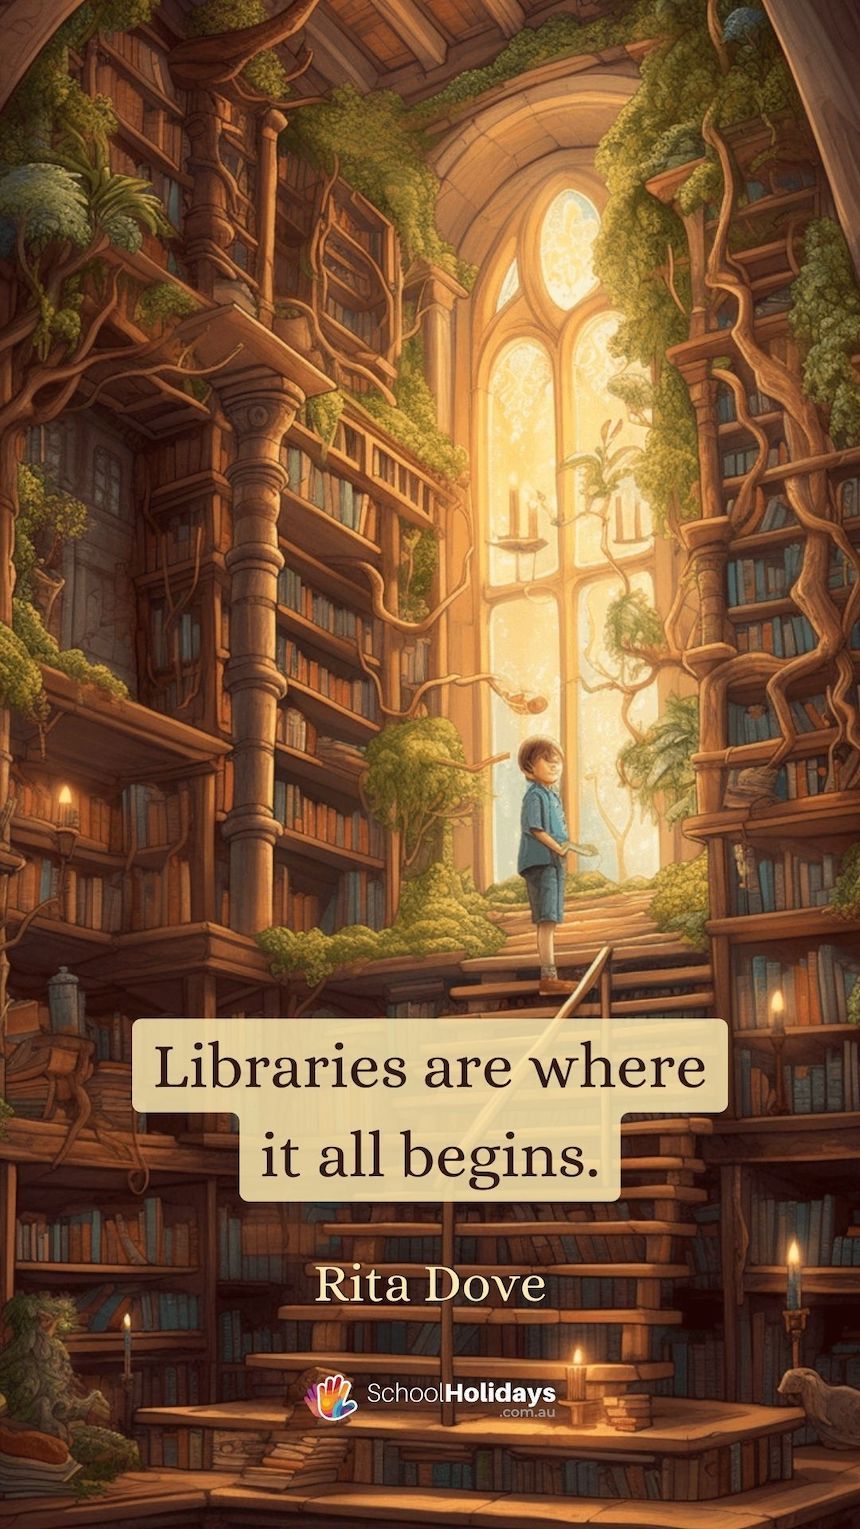 Reading as a hobby quotes: "Libraries are where it all begins." - Rita Dove.